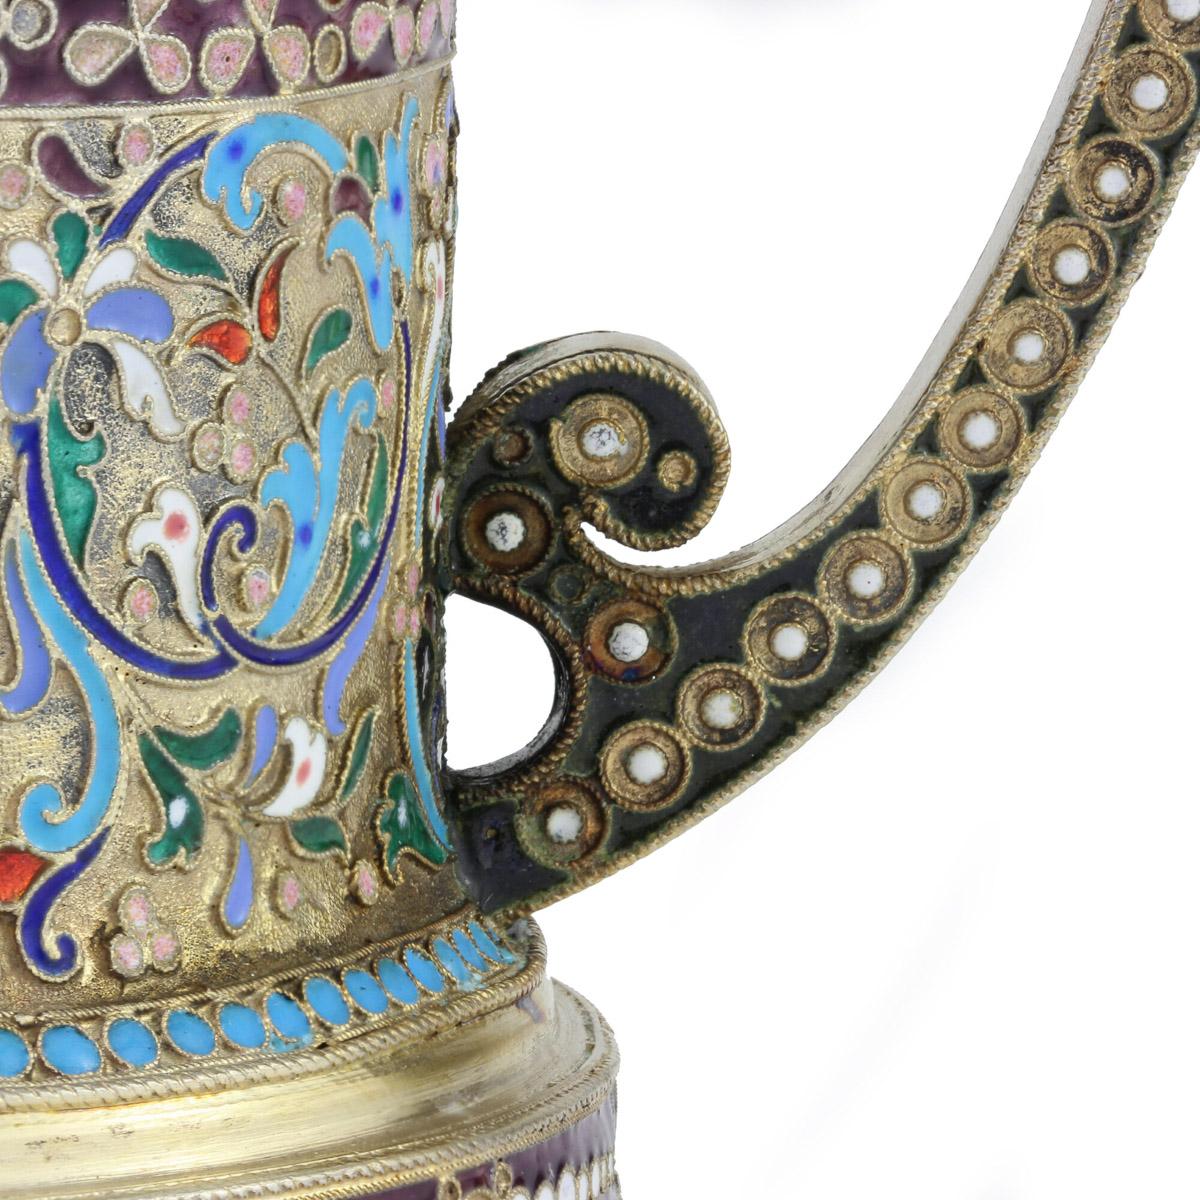 20th Century Imperial Russian Solid Silver-Gilt Enamel Tea Glass Holder, c.1900 8